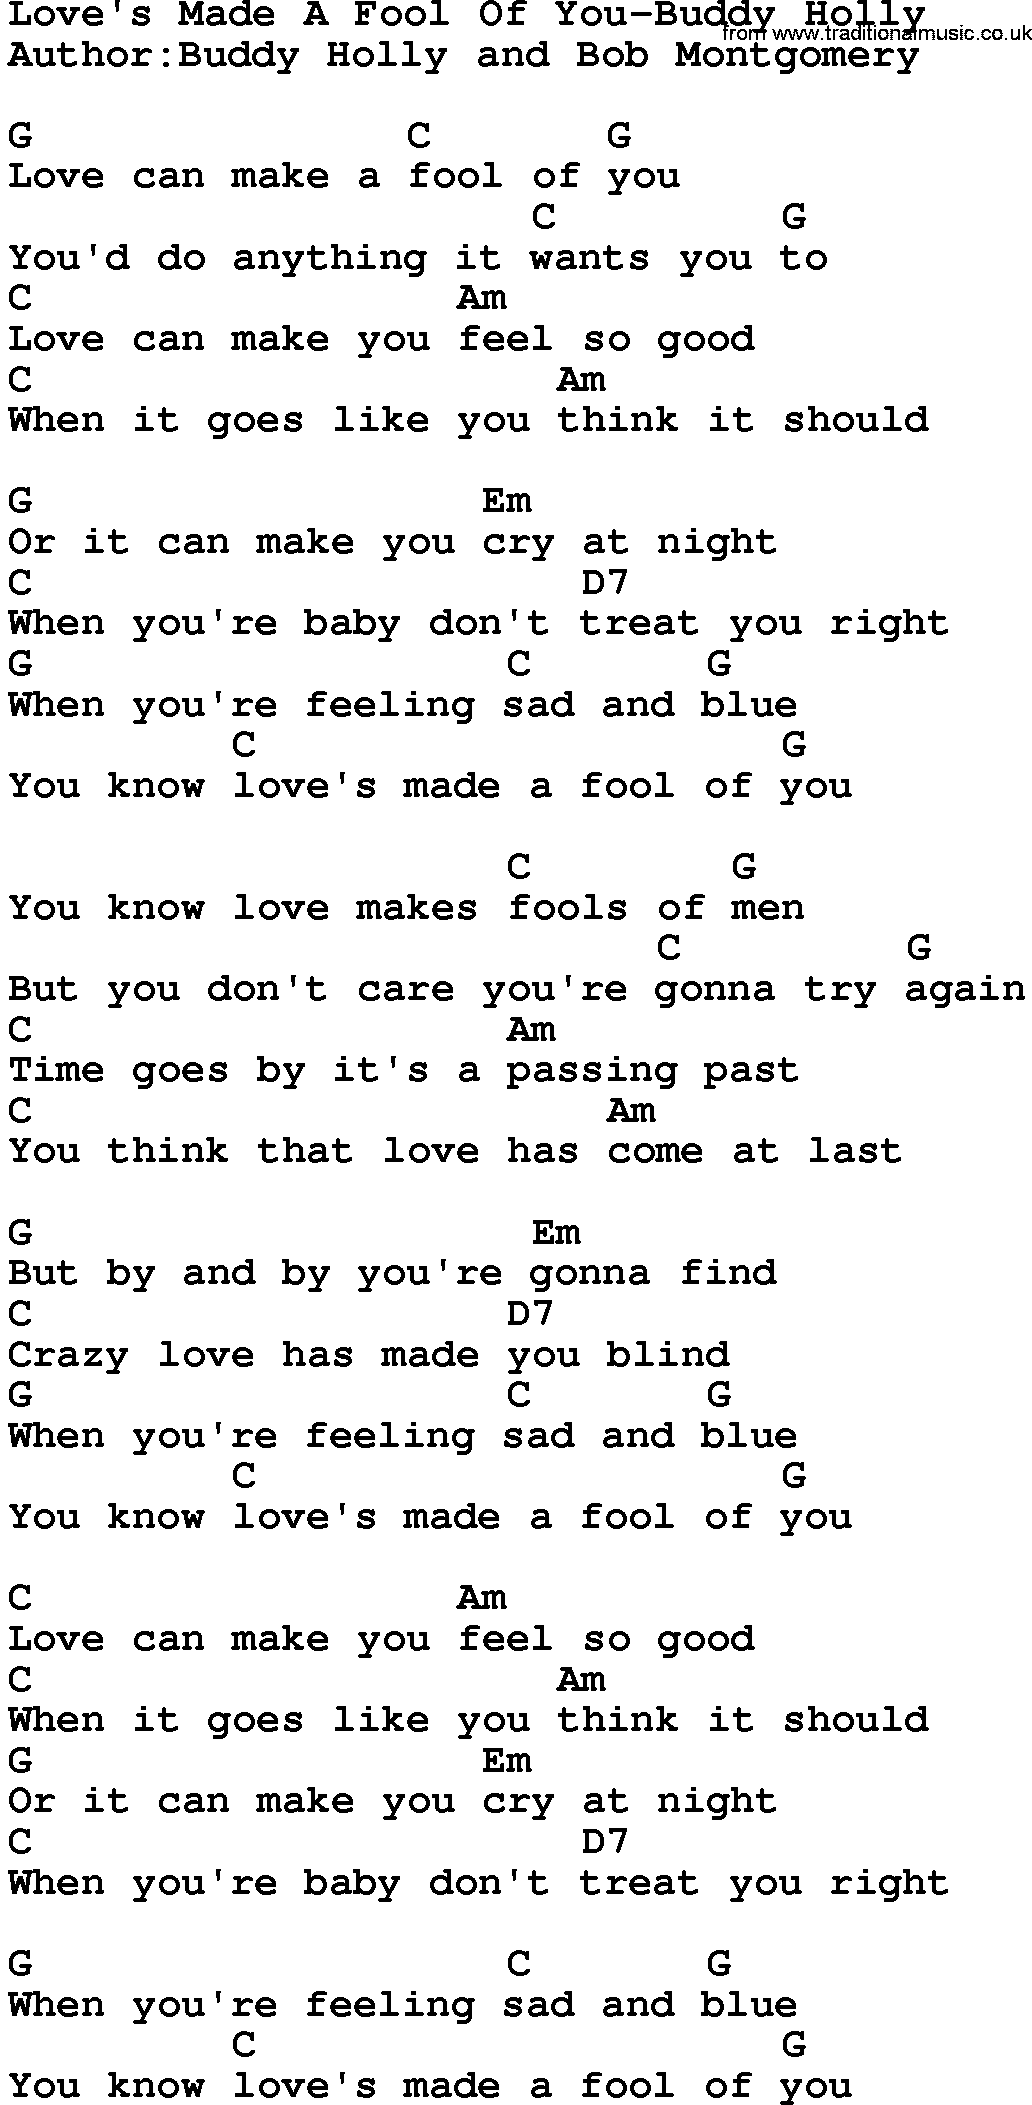 Country music song: Love's Made A Fool Of You-Buddy Holly lyrics and chords